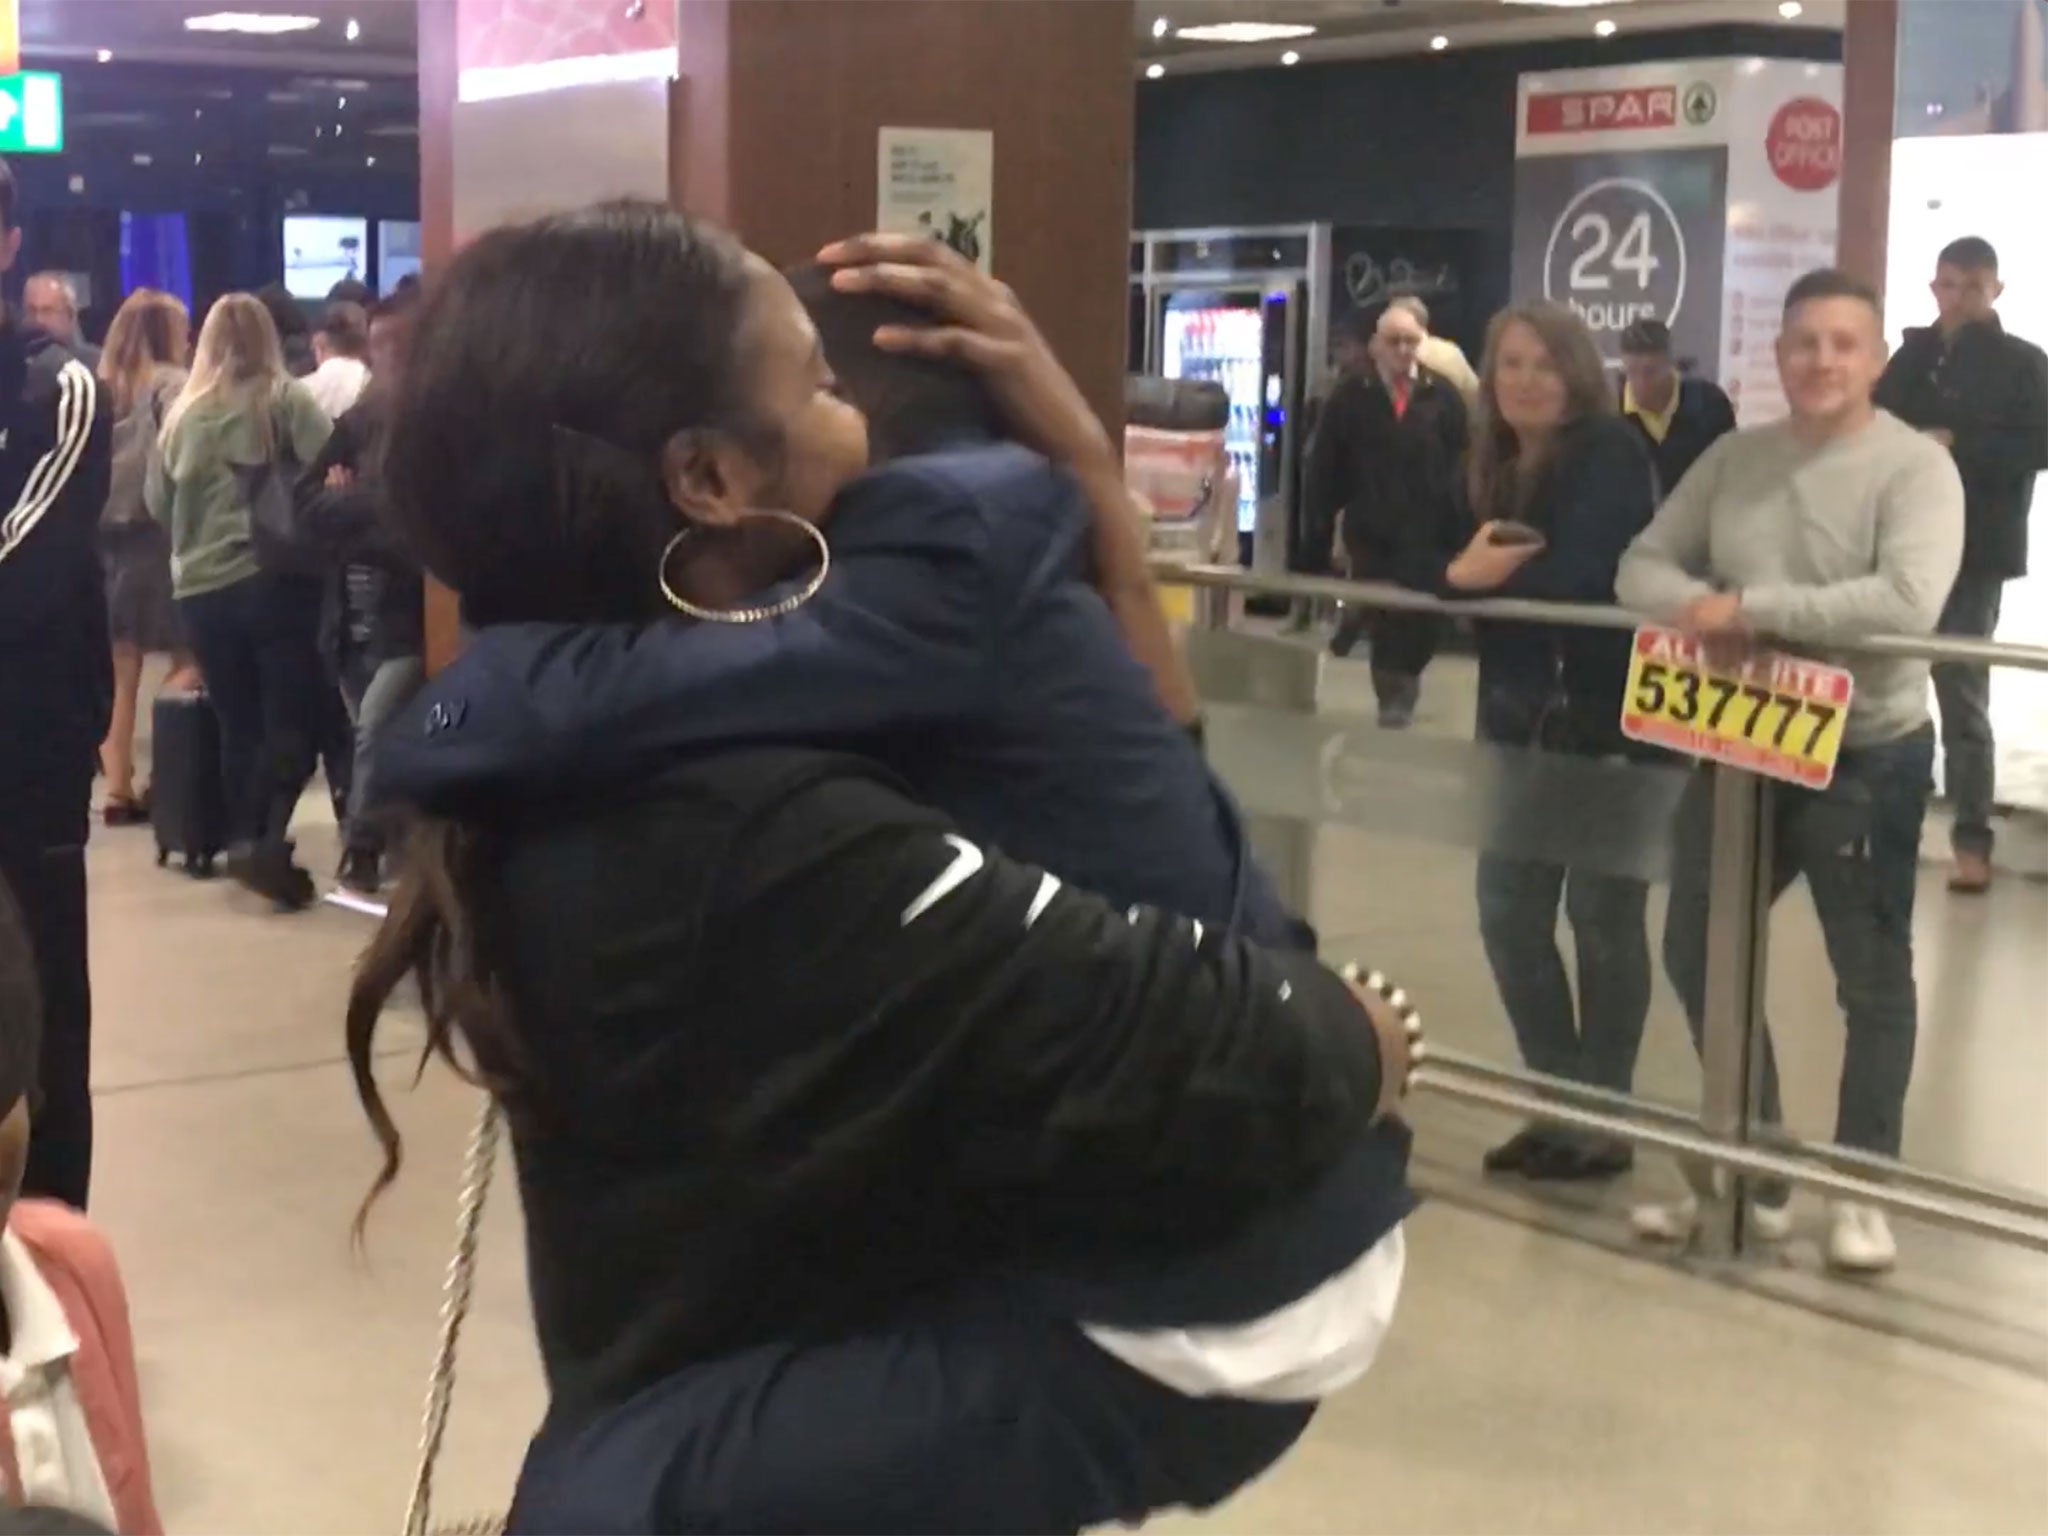 Hawa Keita embraces her son Mohamed at Manchester airport